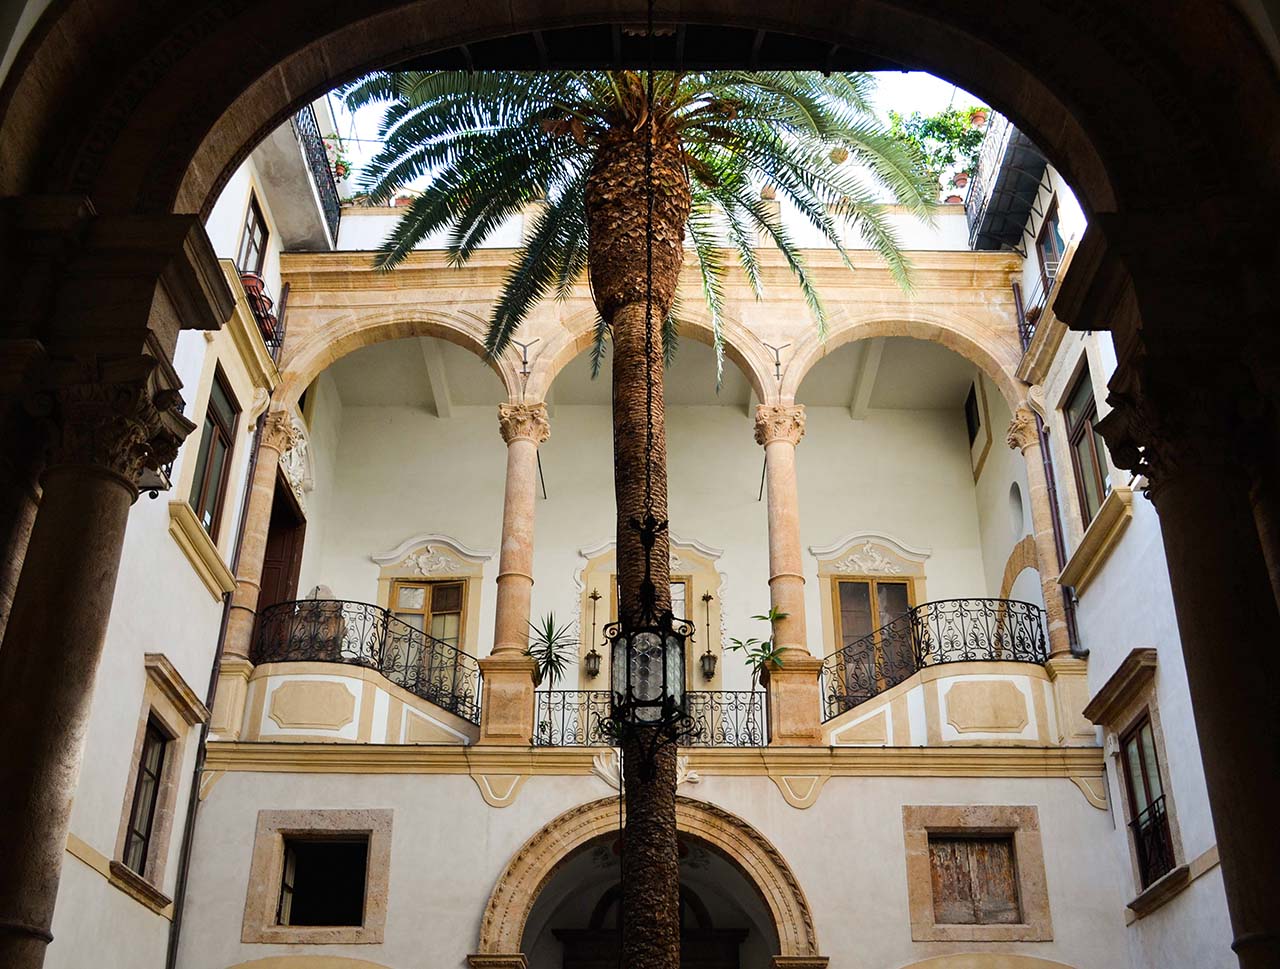 internal courtyard of Palazzo Castrone - Garden of S. Ninfa in Palermo, with a central palm tree